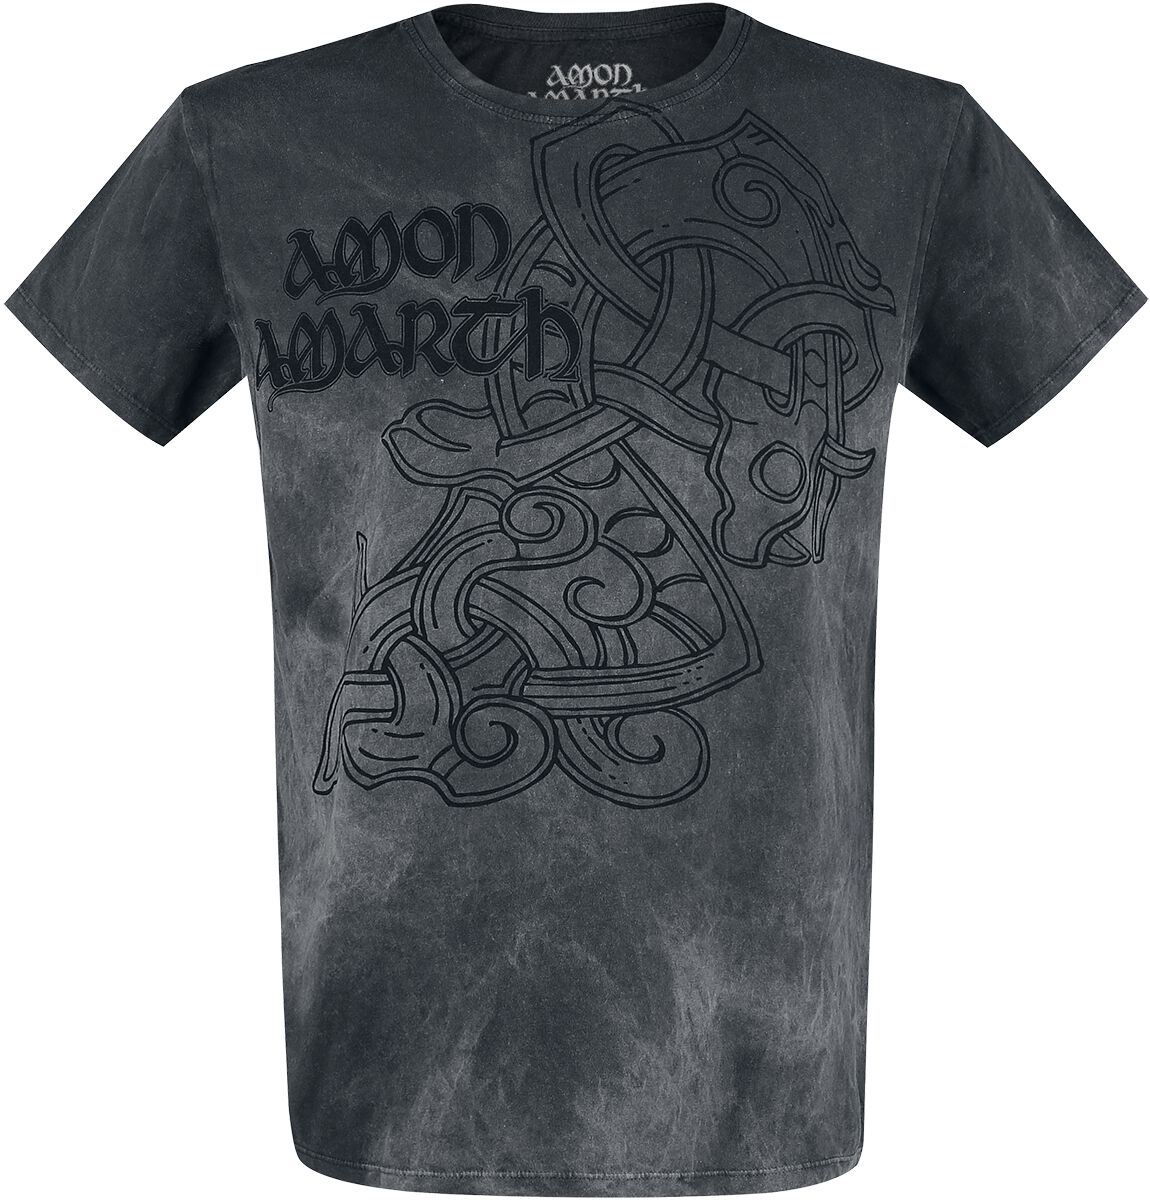 Merchandise Amon Amarth Festivaly Eu Tolkien's the lord of the rings, amon amarth is the sindarin word for mount doom, the volcano in mordor where sauron forged the one ring. merchandise amon amarth festivaly eu